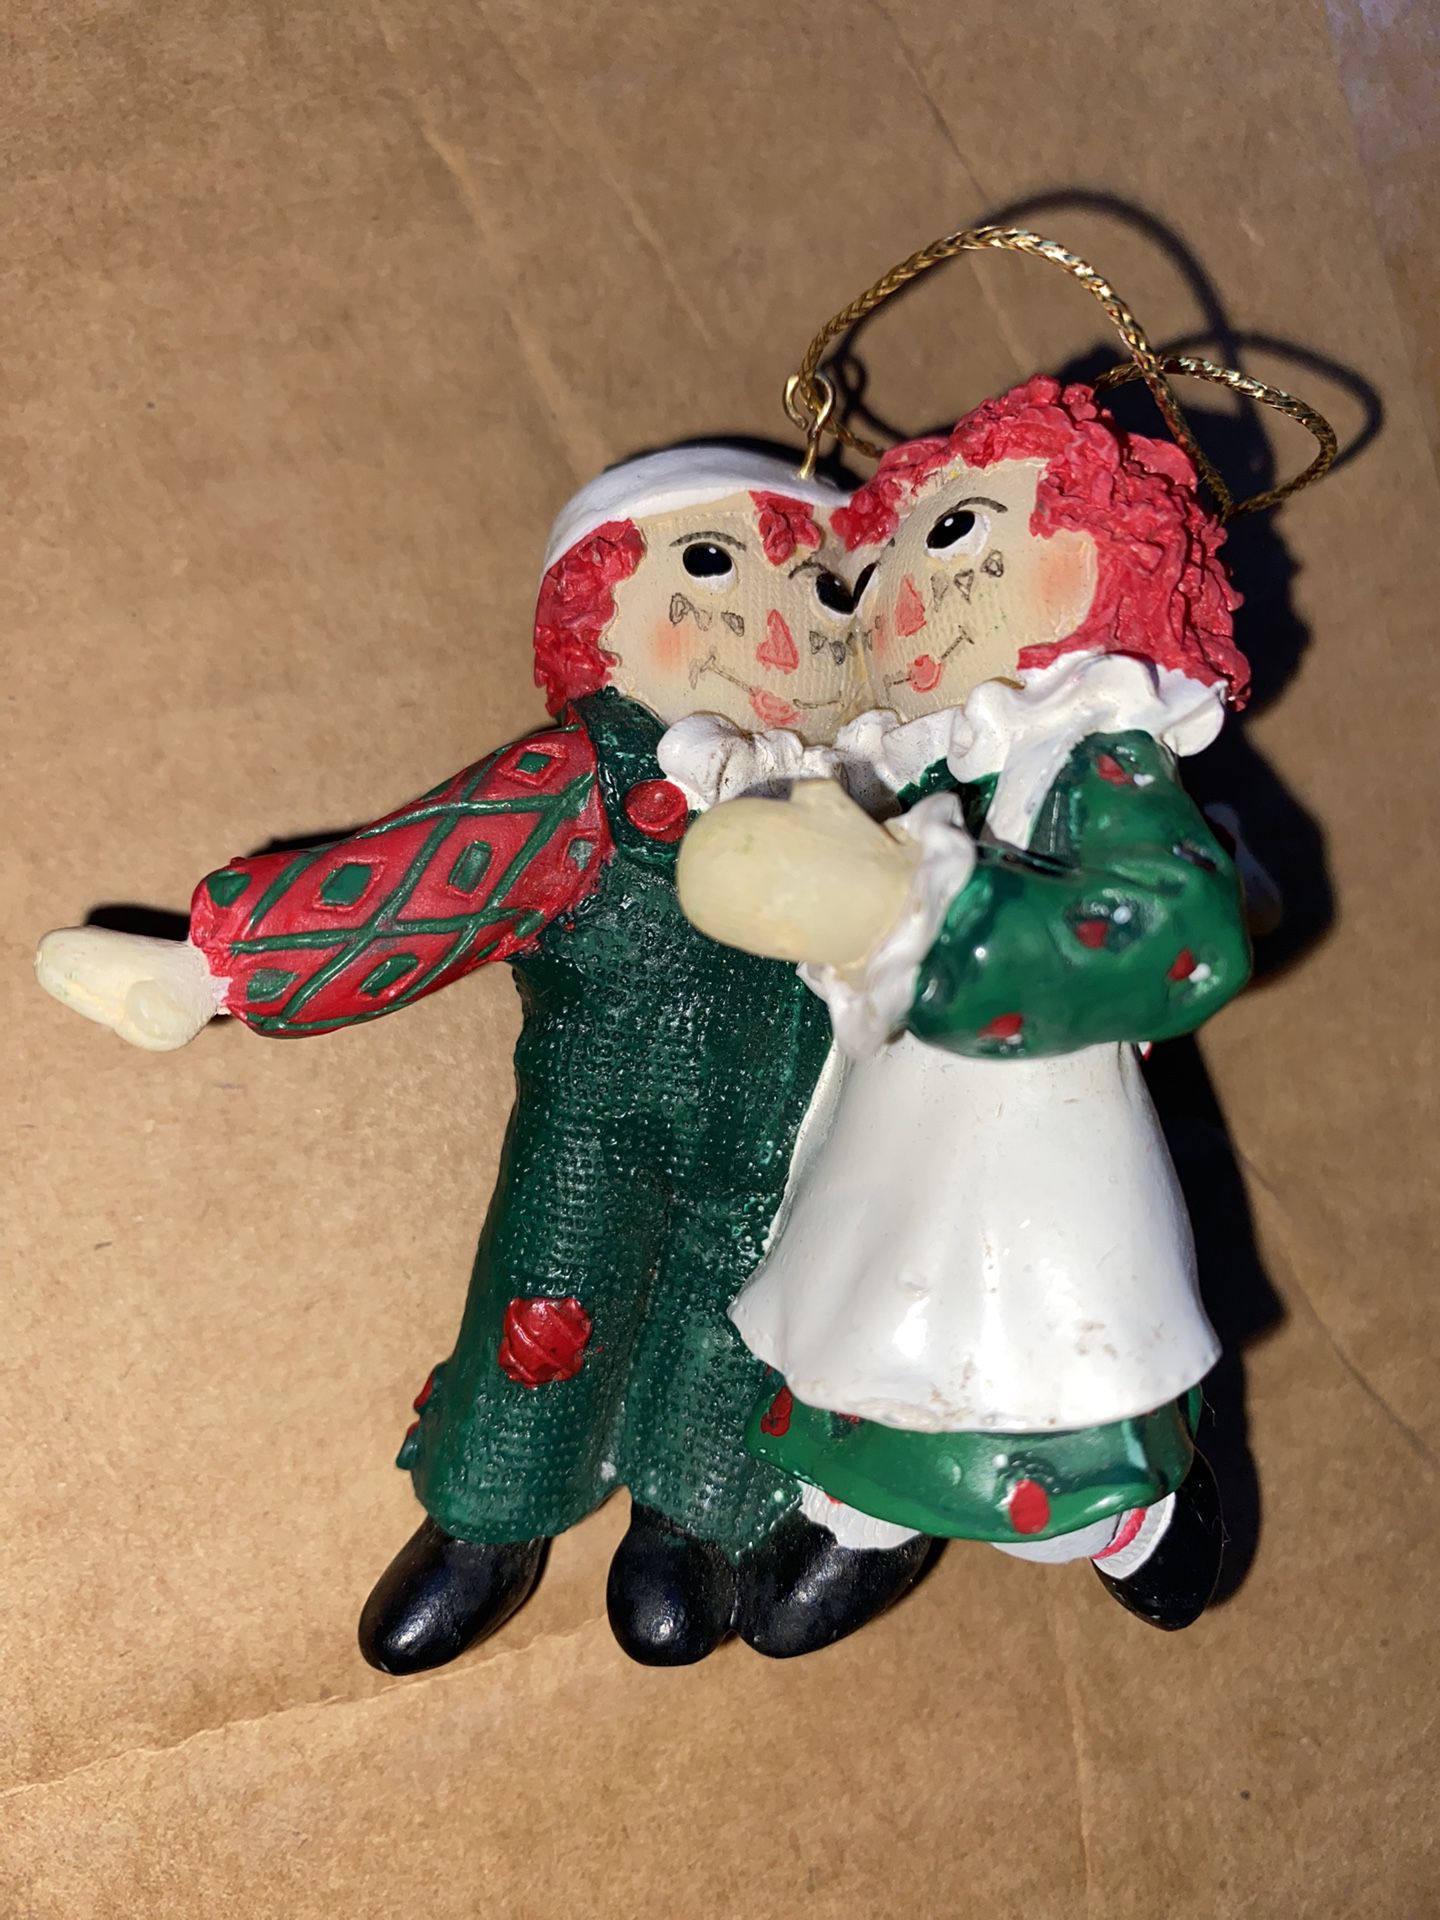 1998 Raggedy Ann and Andy Christmas Ornament by S and S Hugging Figures